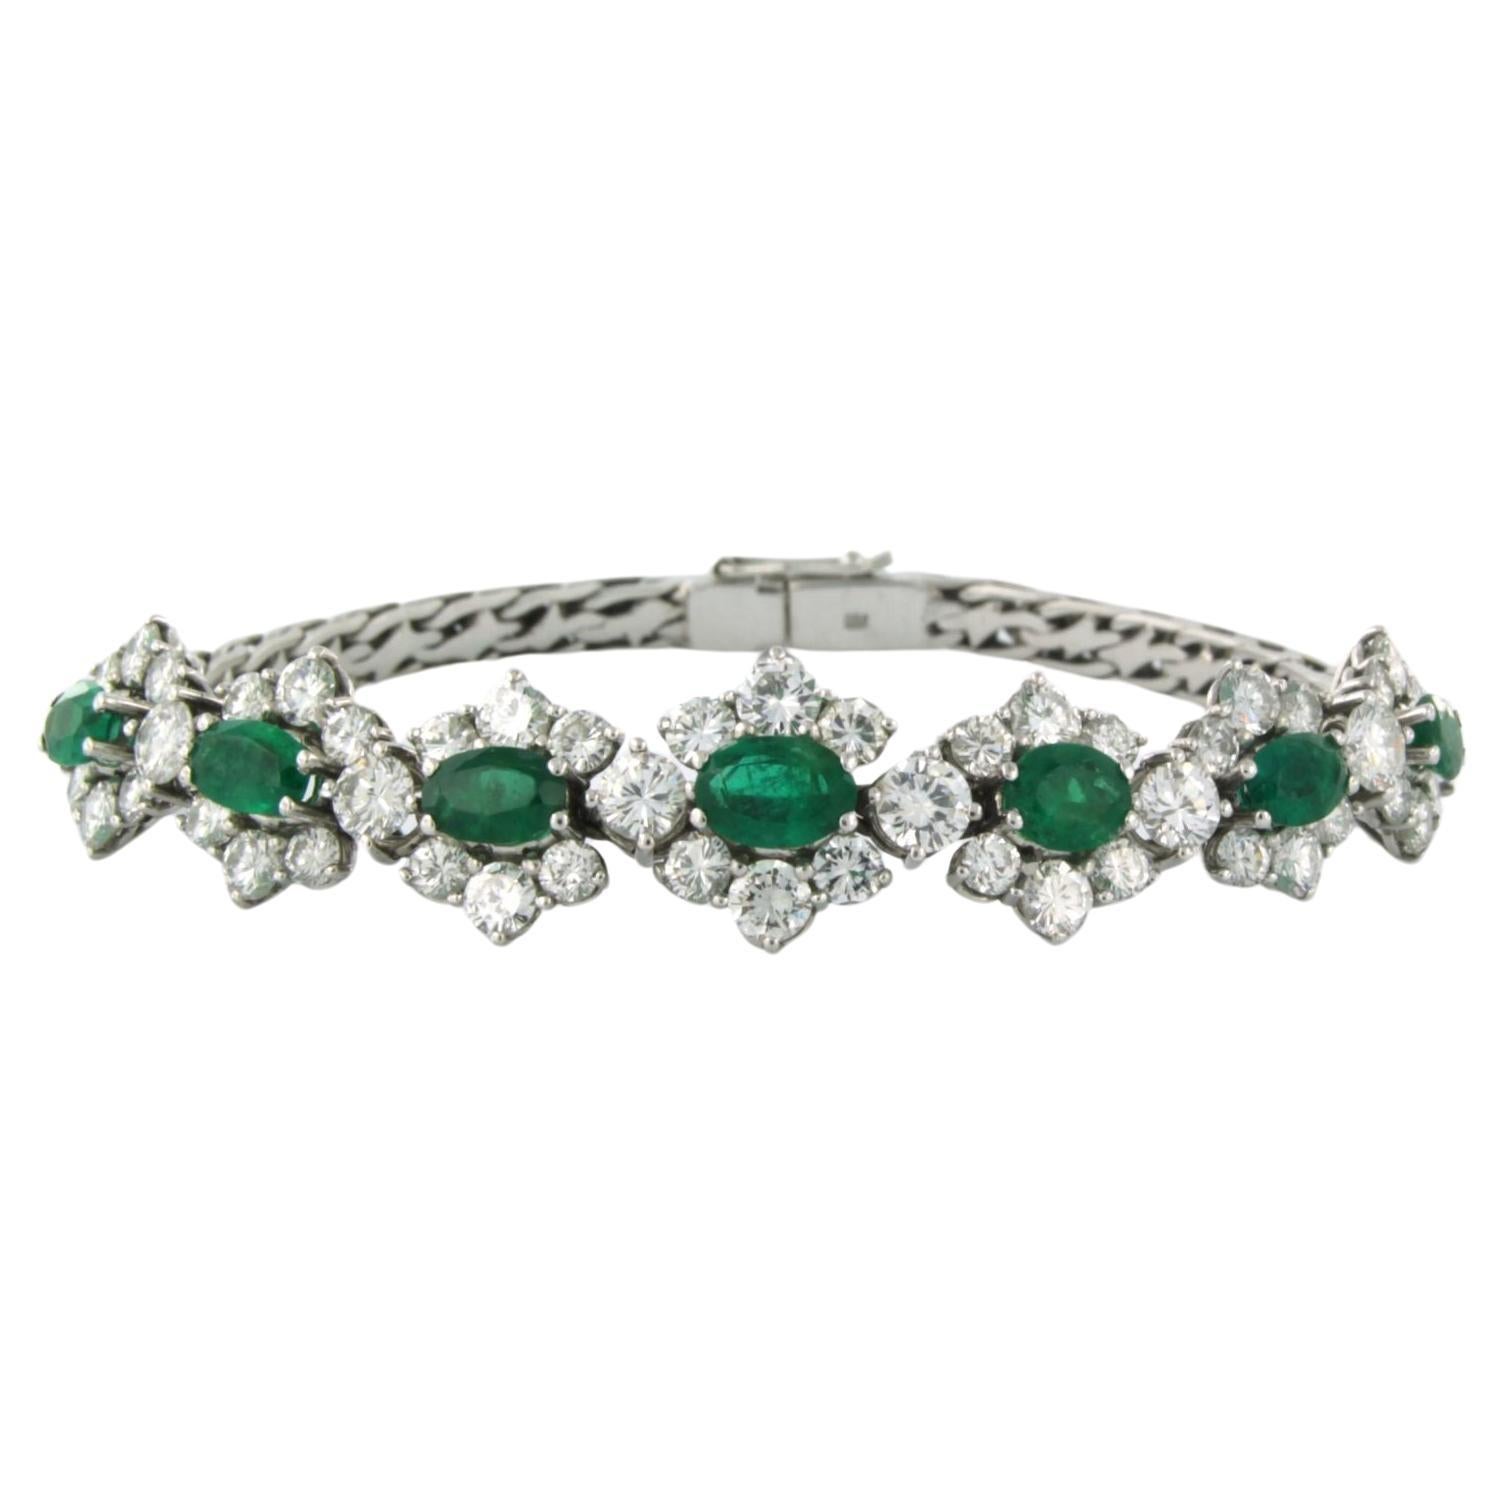 Bracelet set with emerald and brilliant cut diamonds up to 6.00ct 18k white gold